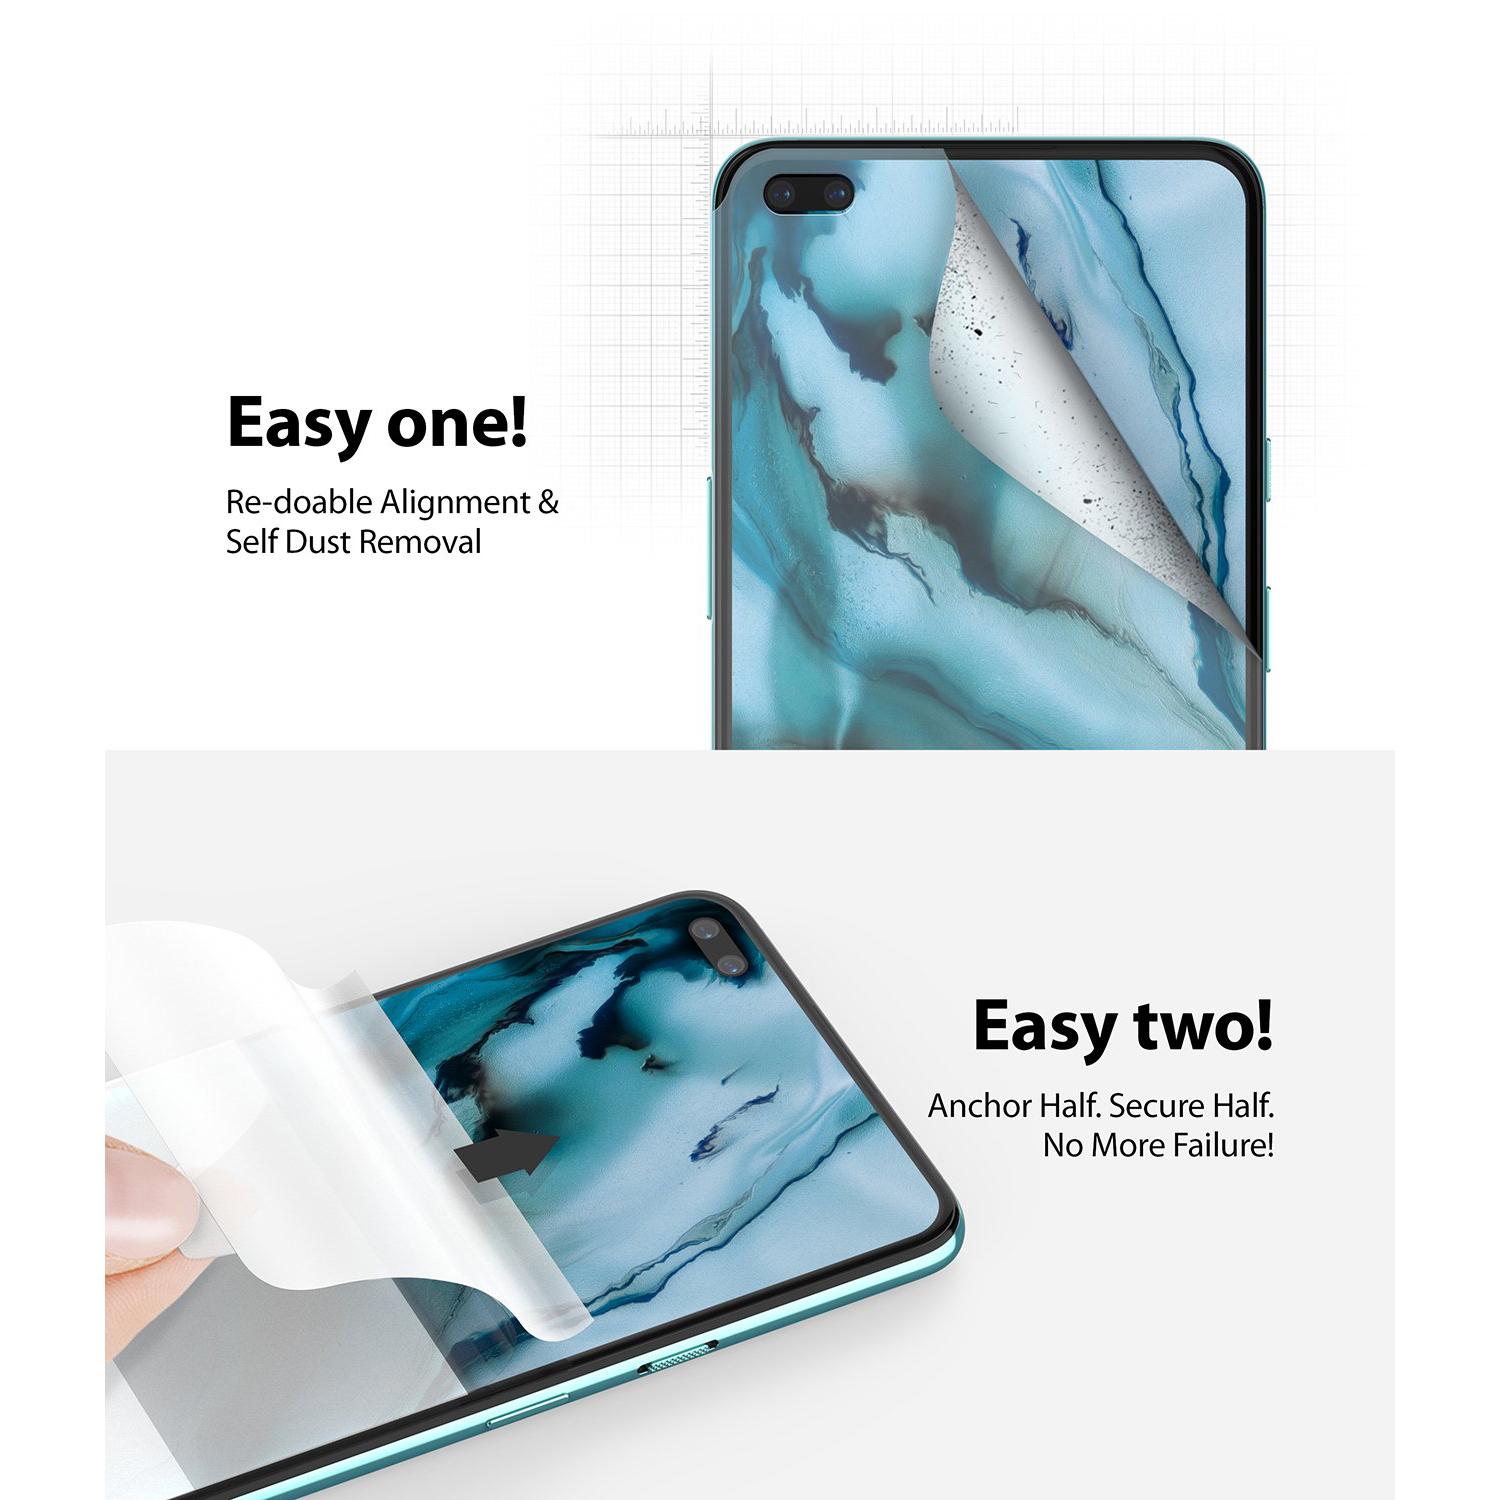 Dual Easy Wing Screen Protector (2-pack) OnePlus Nord